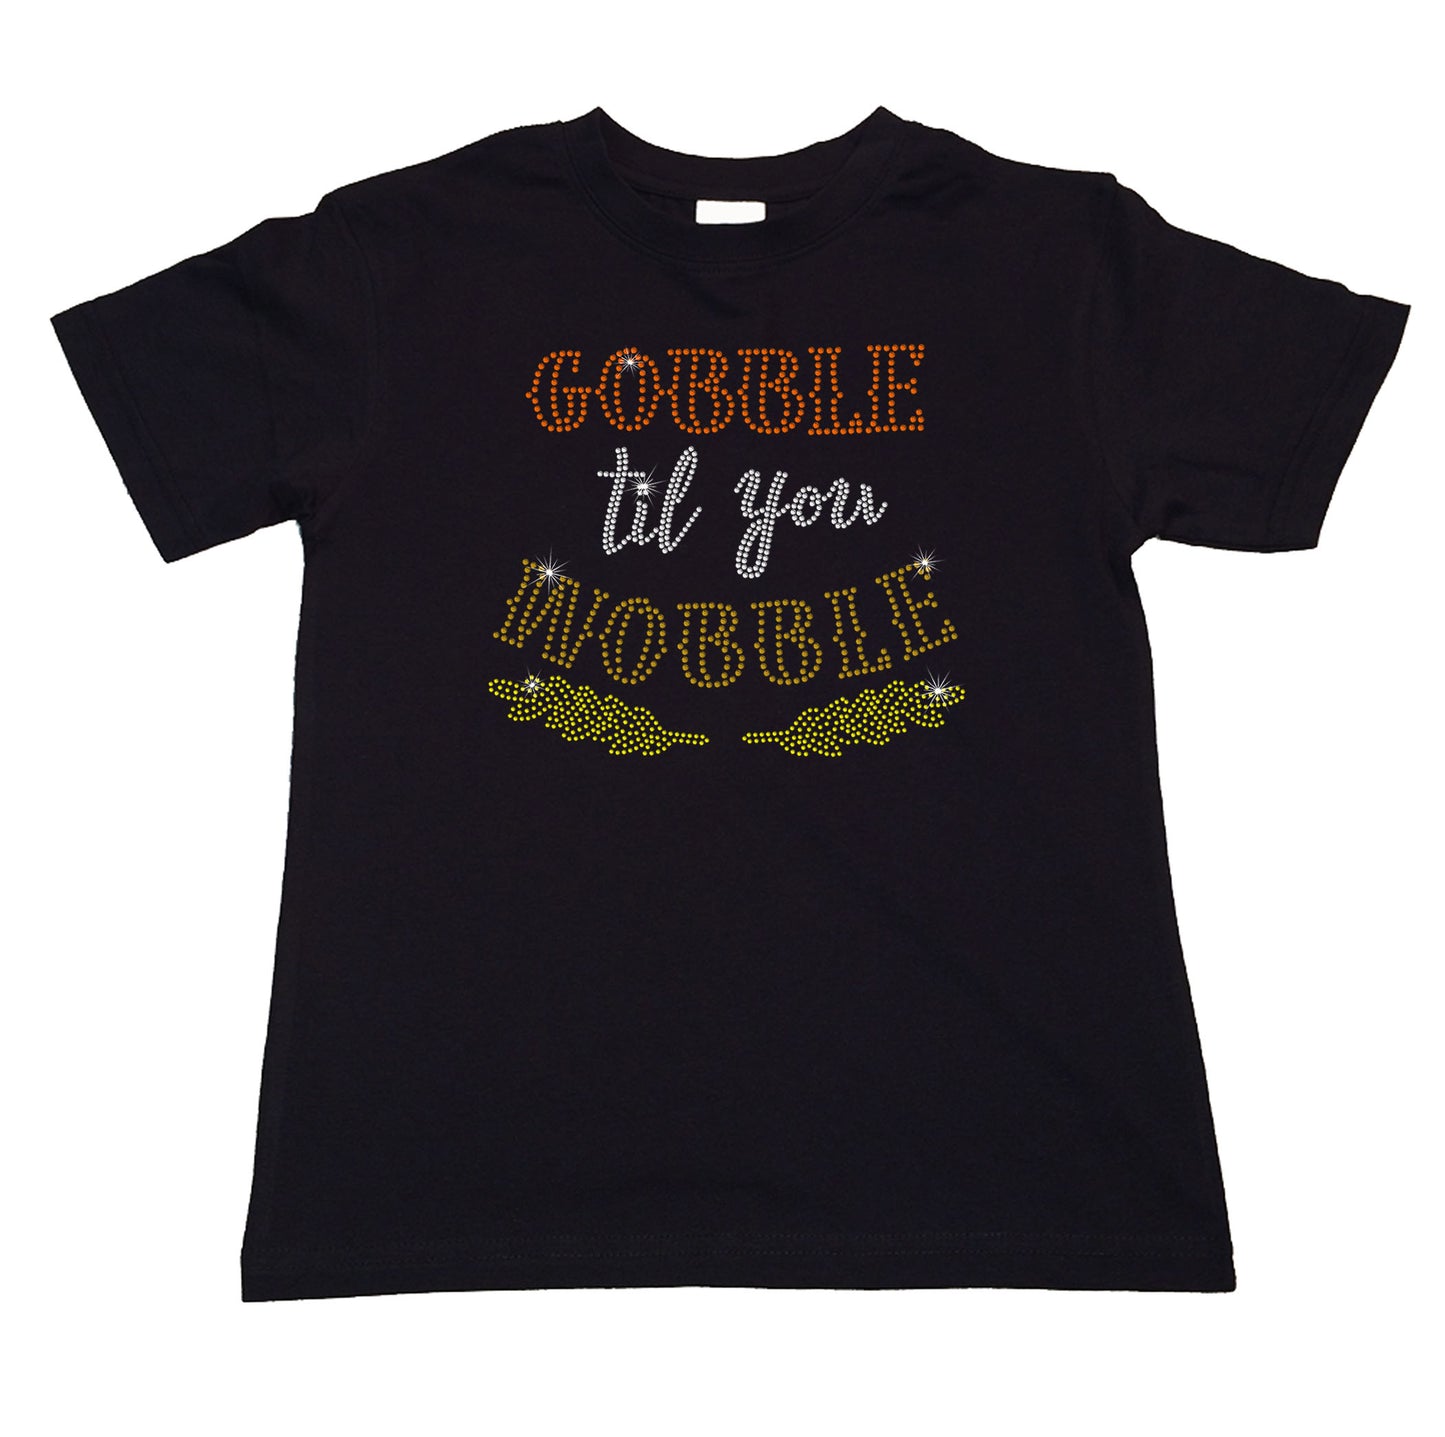 Girls Rhinestone T-Shirt " Gobble til you Wobble in Rhinestones " Kids Size 3 to 14 Available